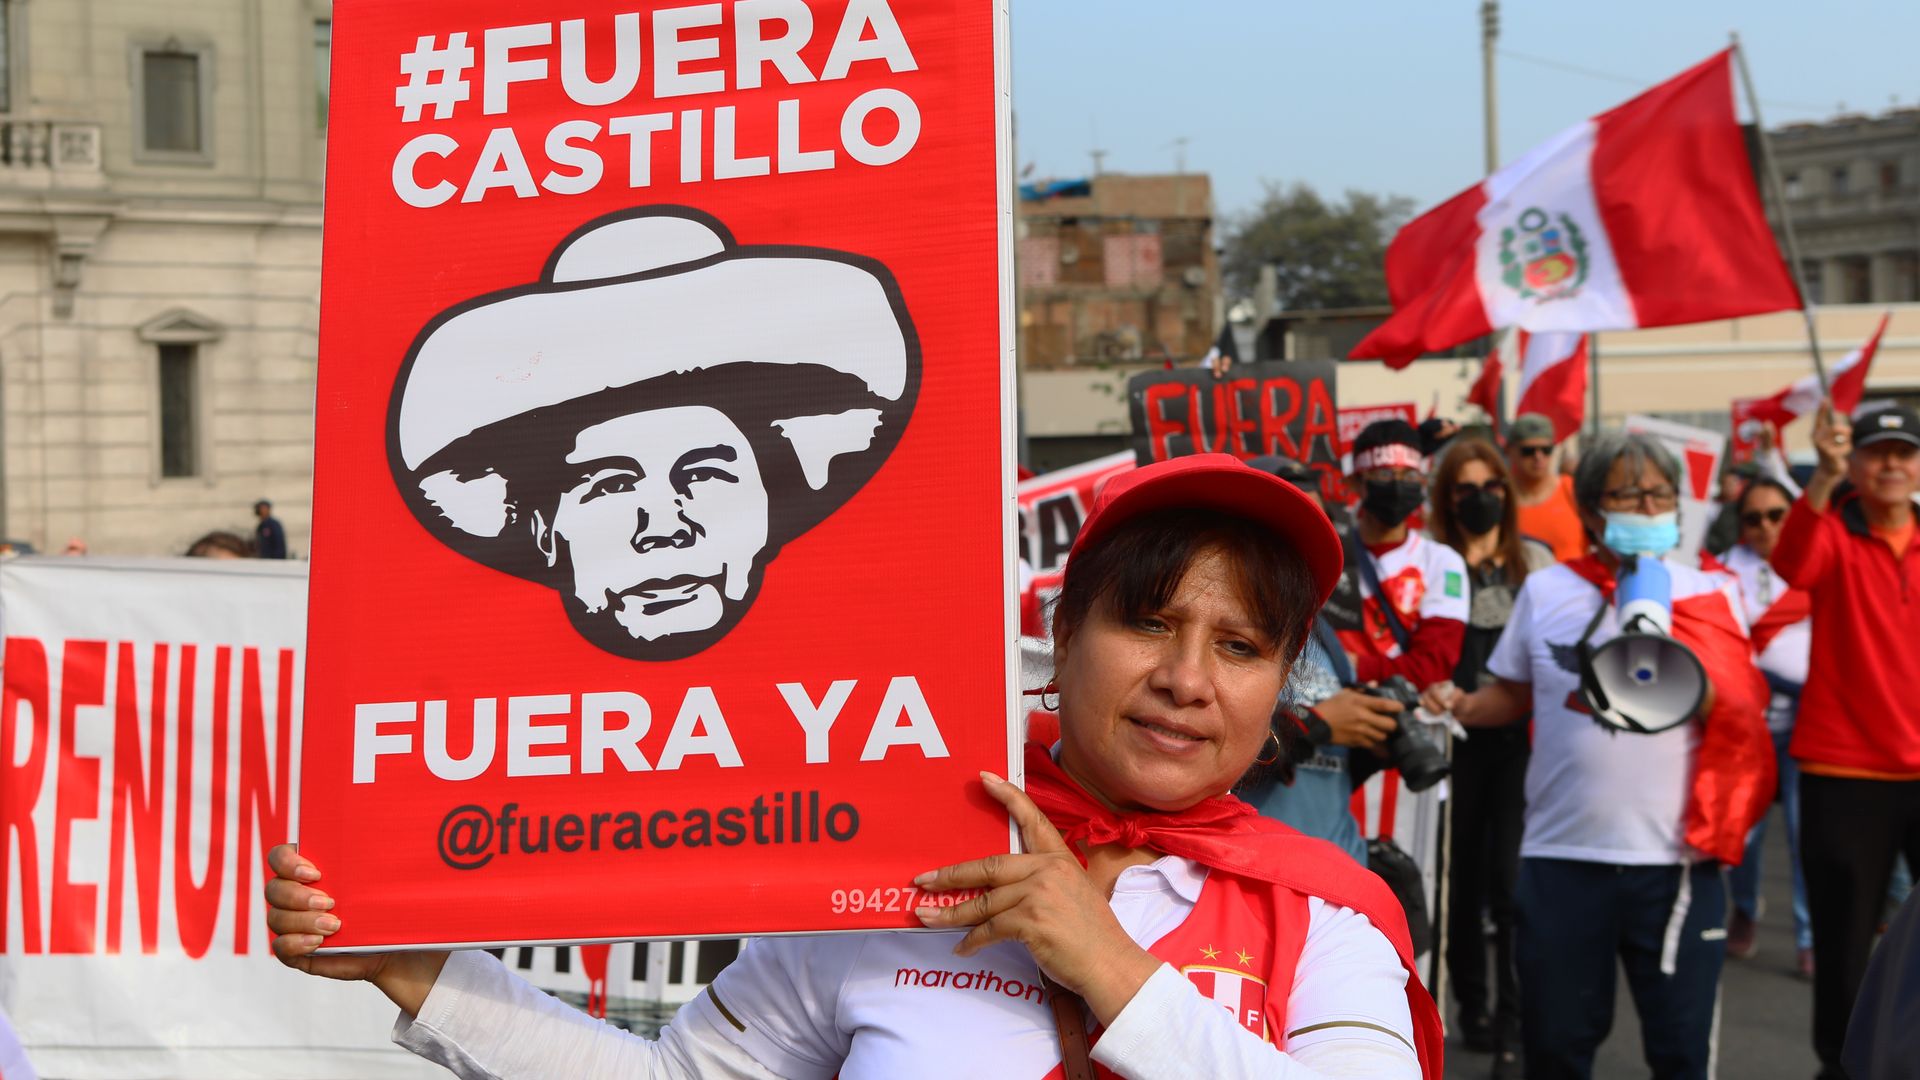 Protesters march through Peru wearing red and white and holding up large signs that say "out Castillo" referencing the embattled president 